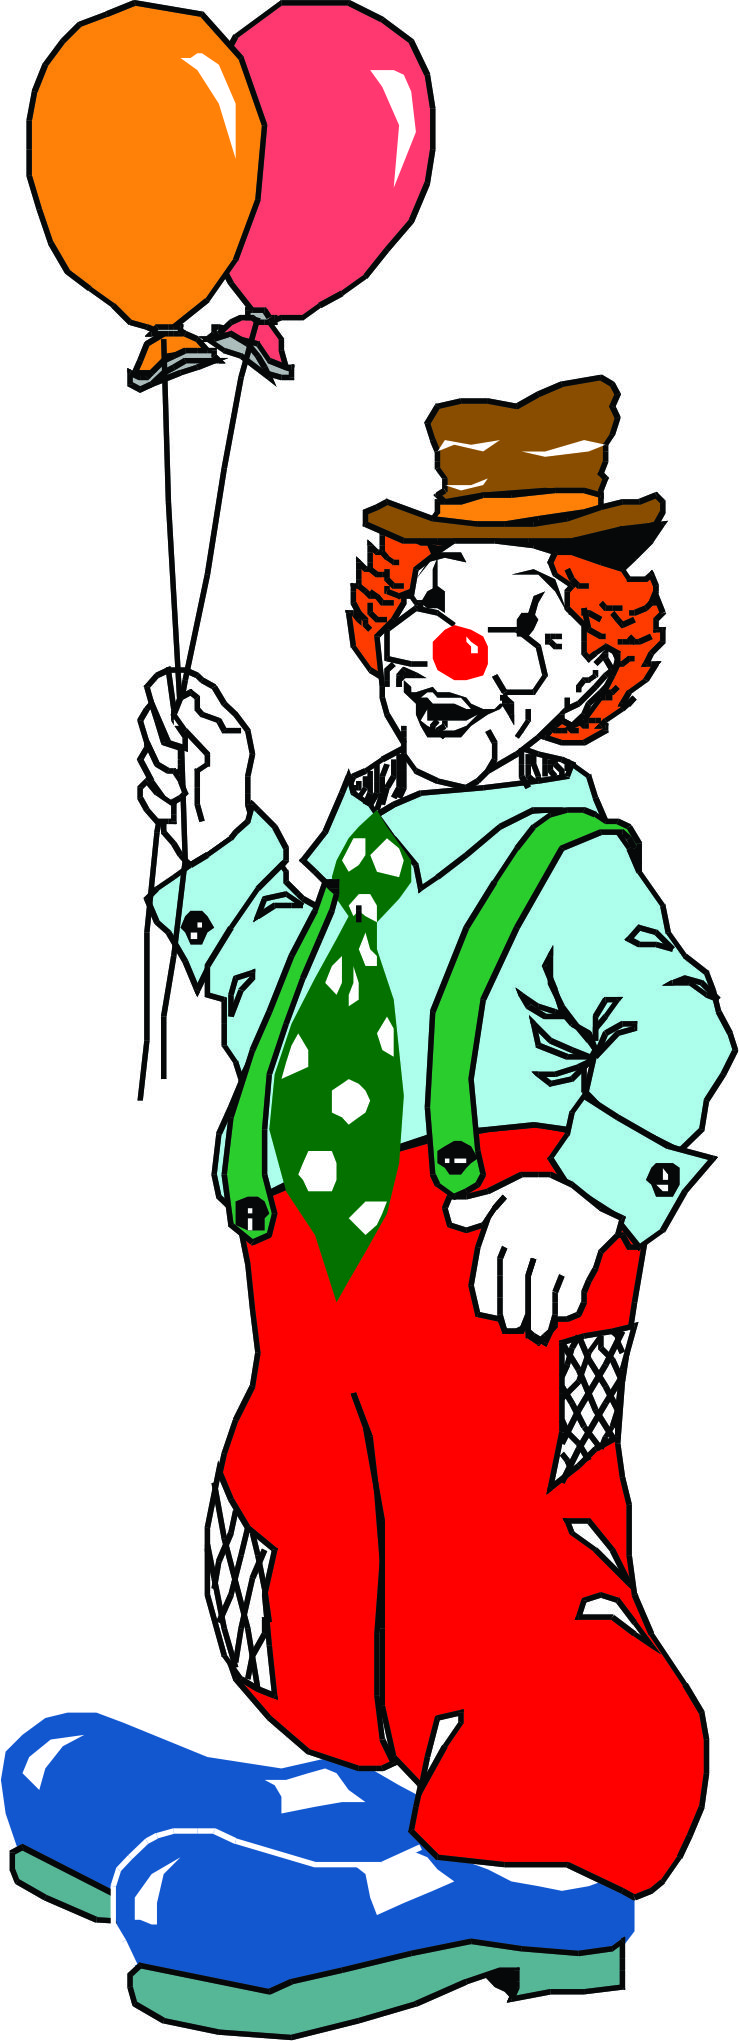 Animated Christmas Clipart Pictures Of Balloons Cartoon Clowns Page